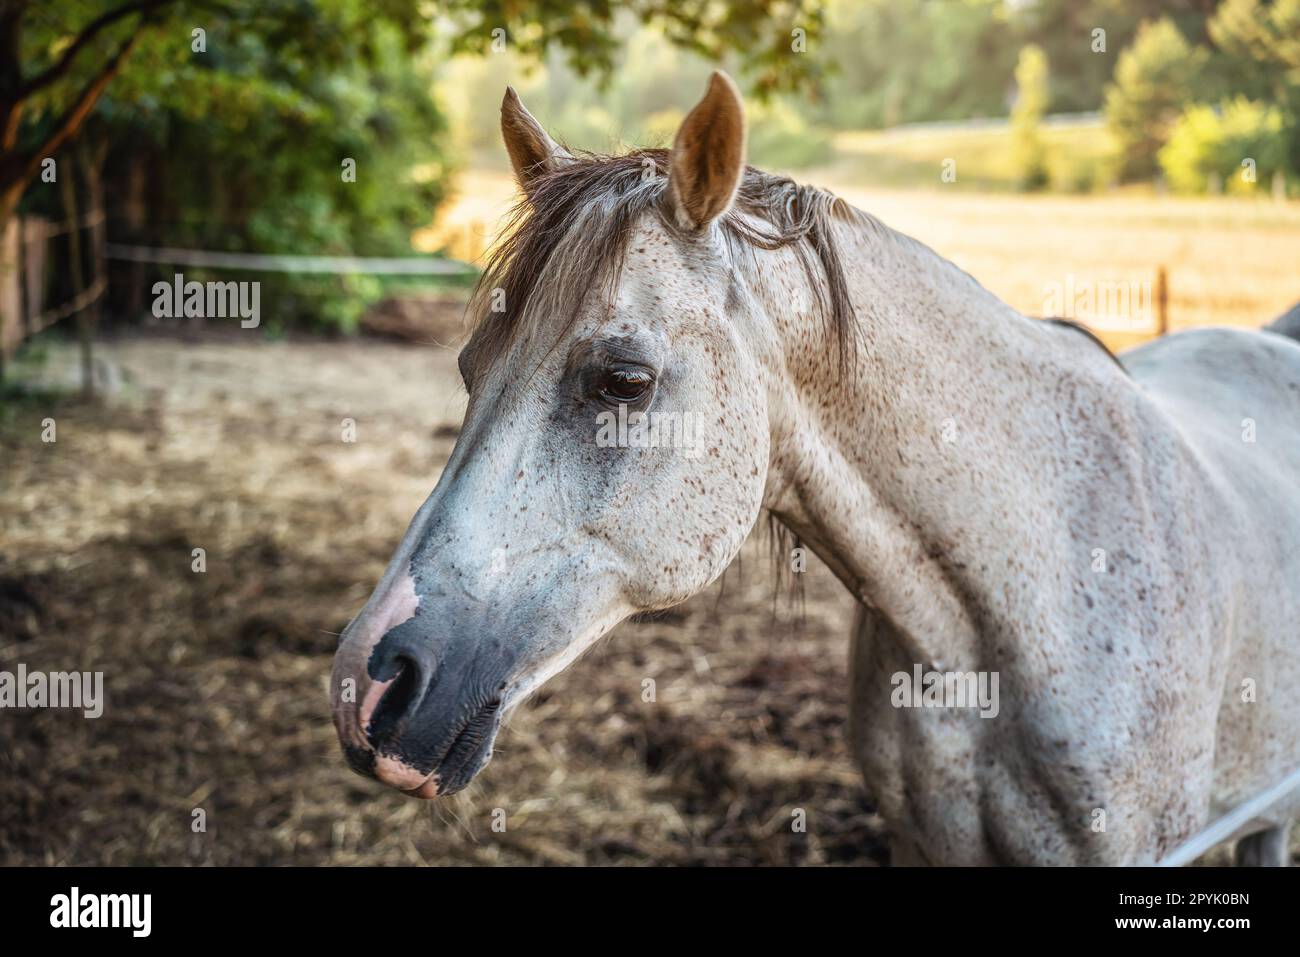 White spotted Arabian horse standing on farm ground, blurred meadow and forest background, closeup detail to animal head Stock Photo